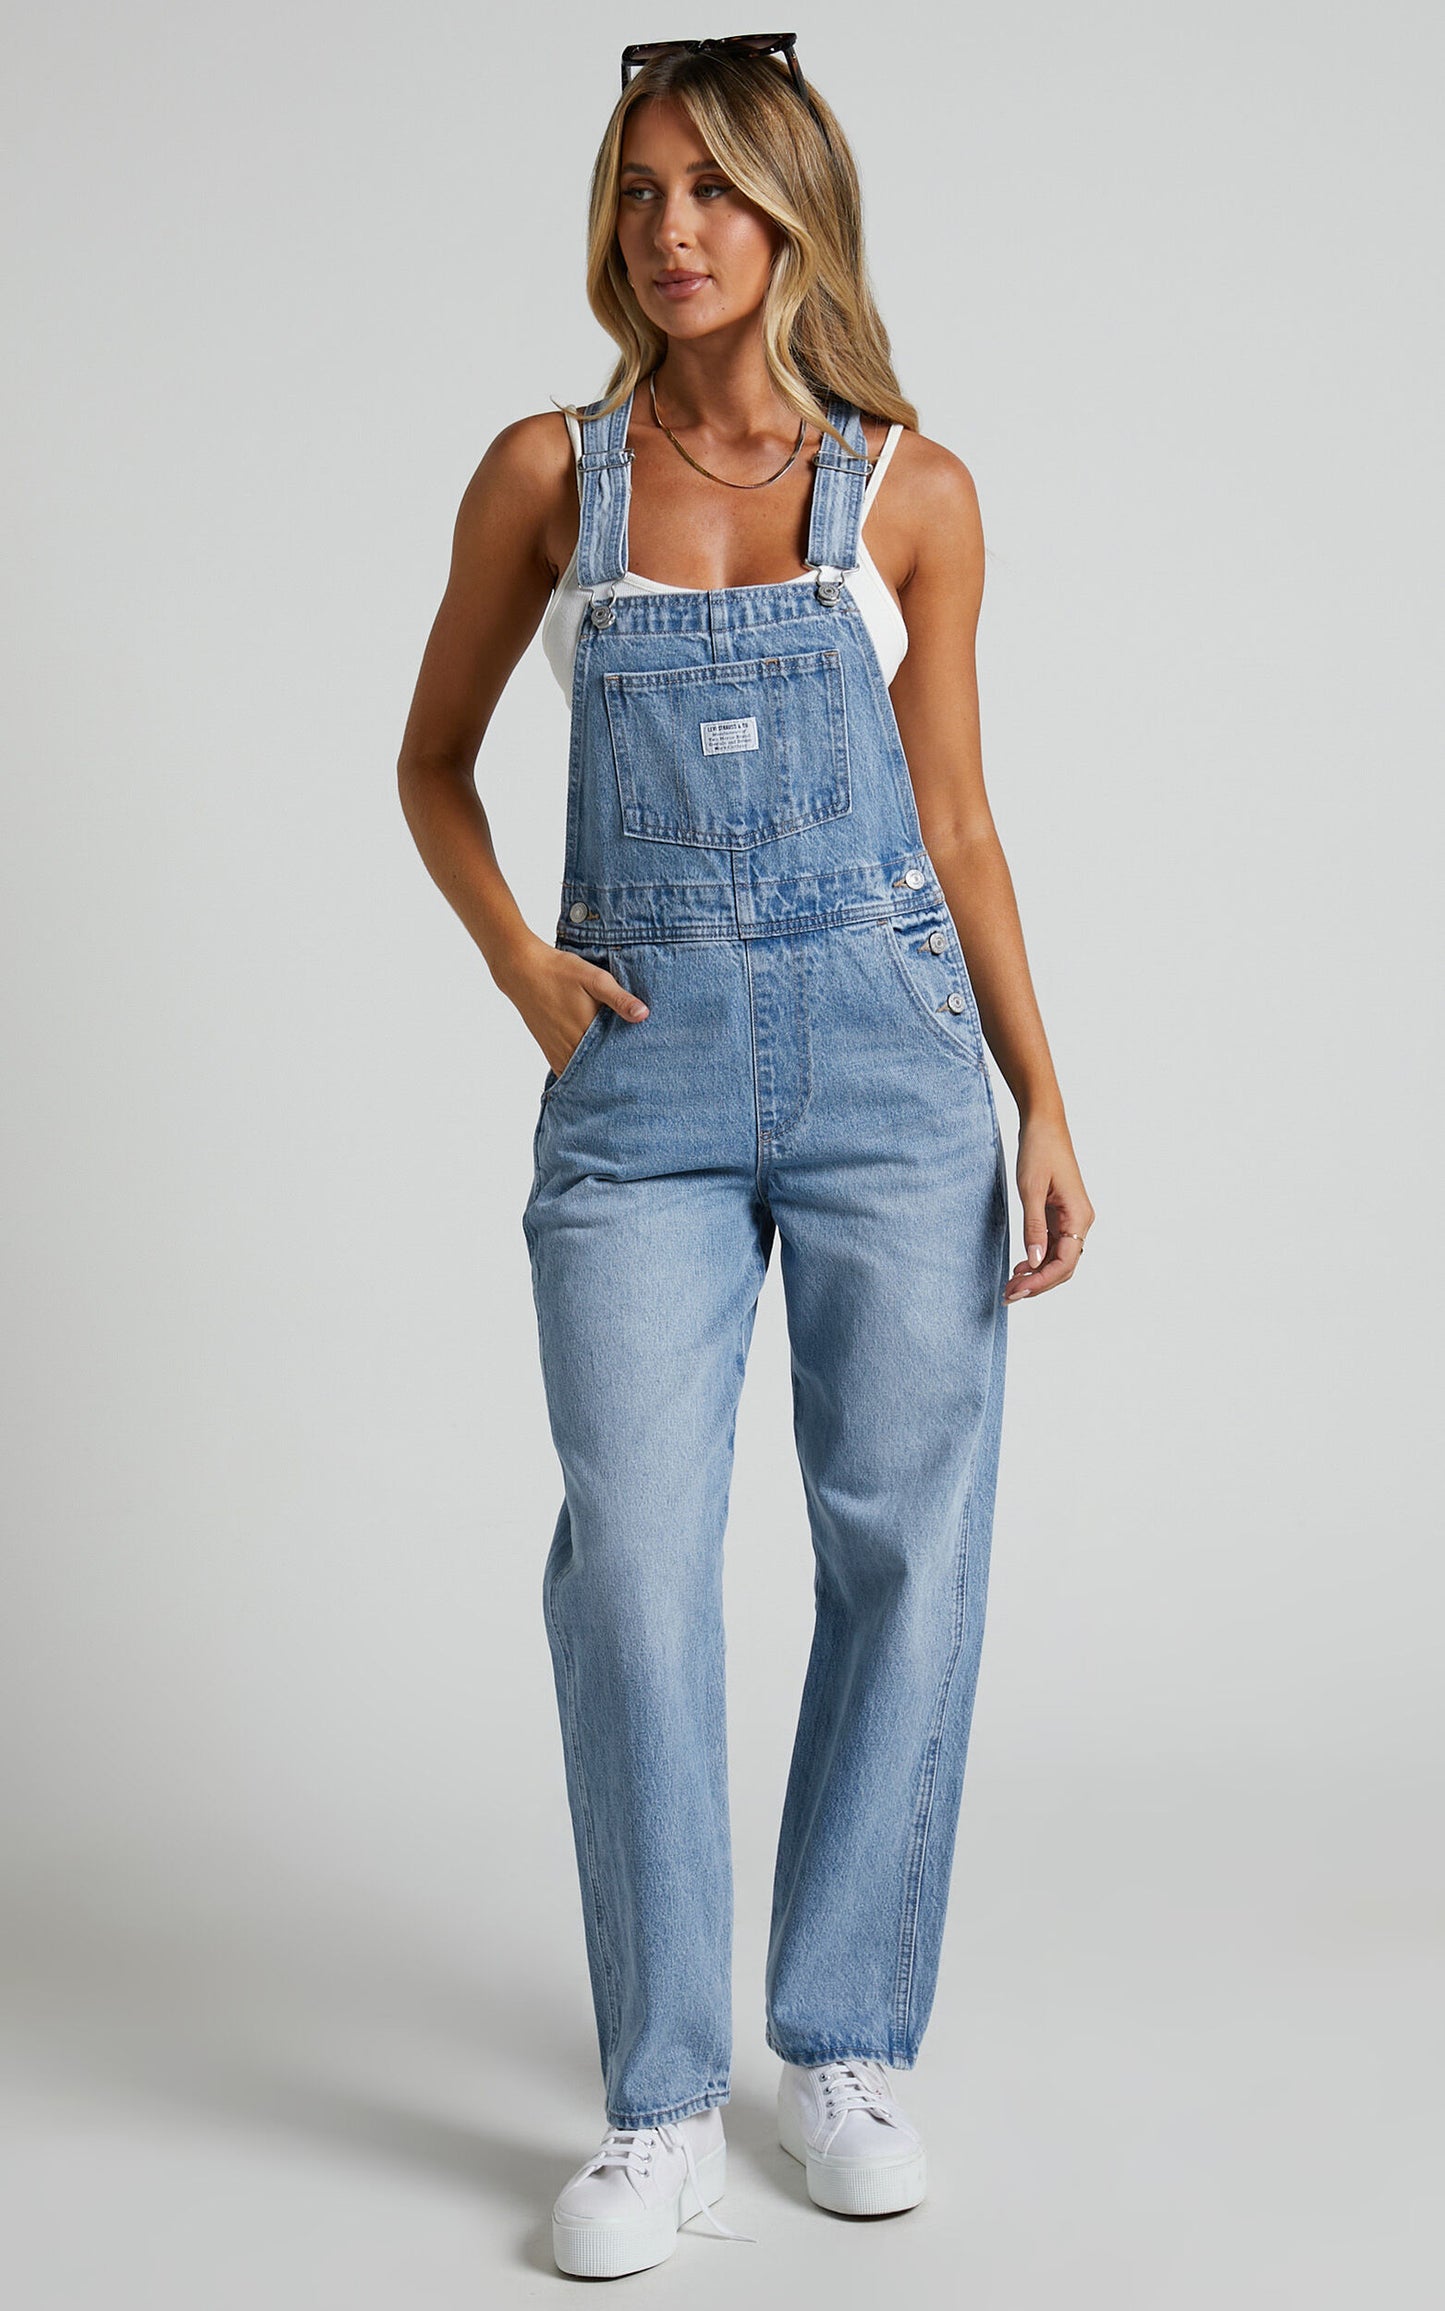 Vintage Overalls | What A Delight